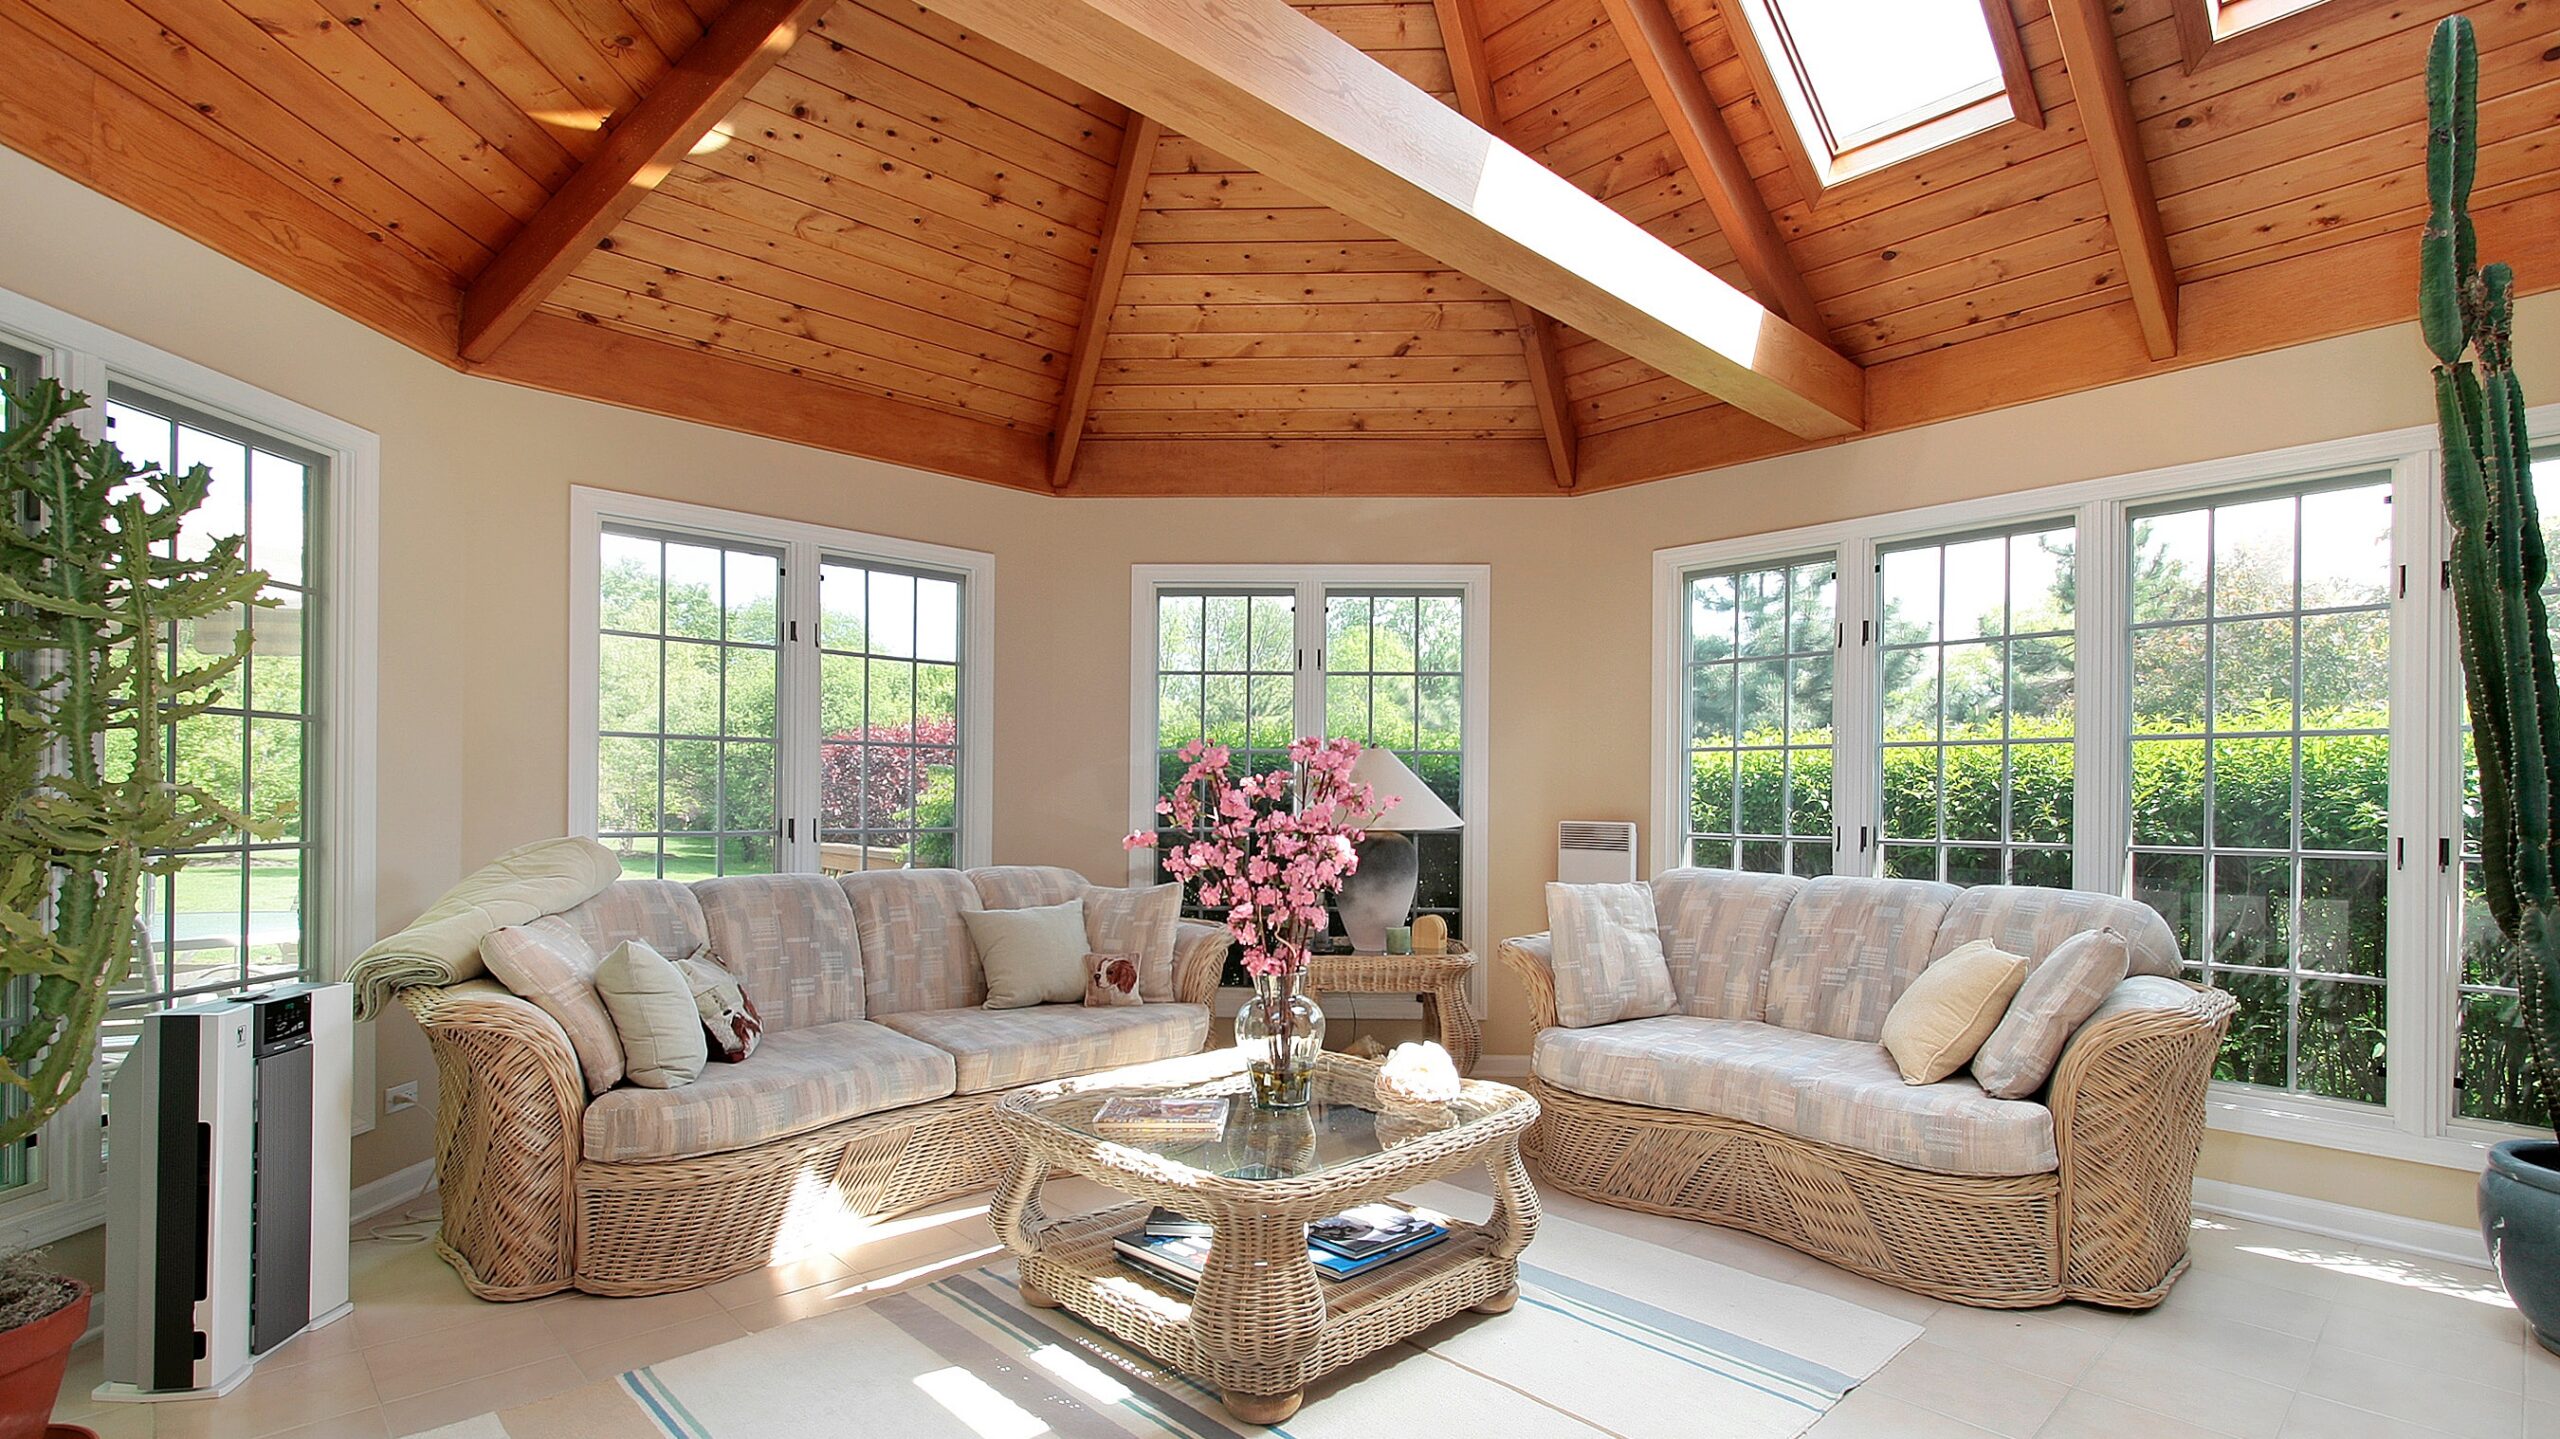 A sunroom with a wood beam ceiling and skylights